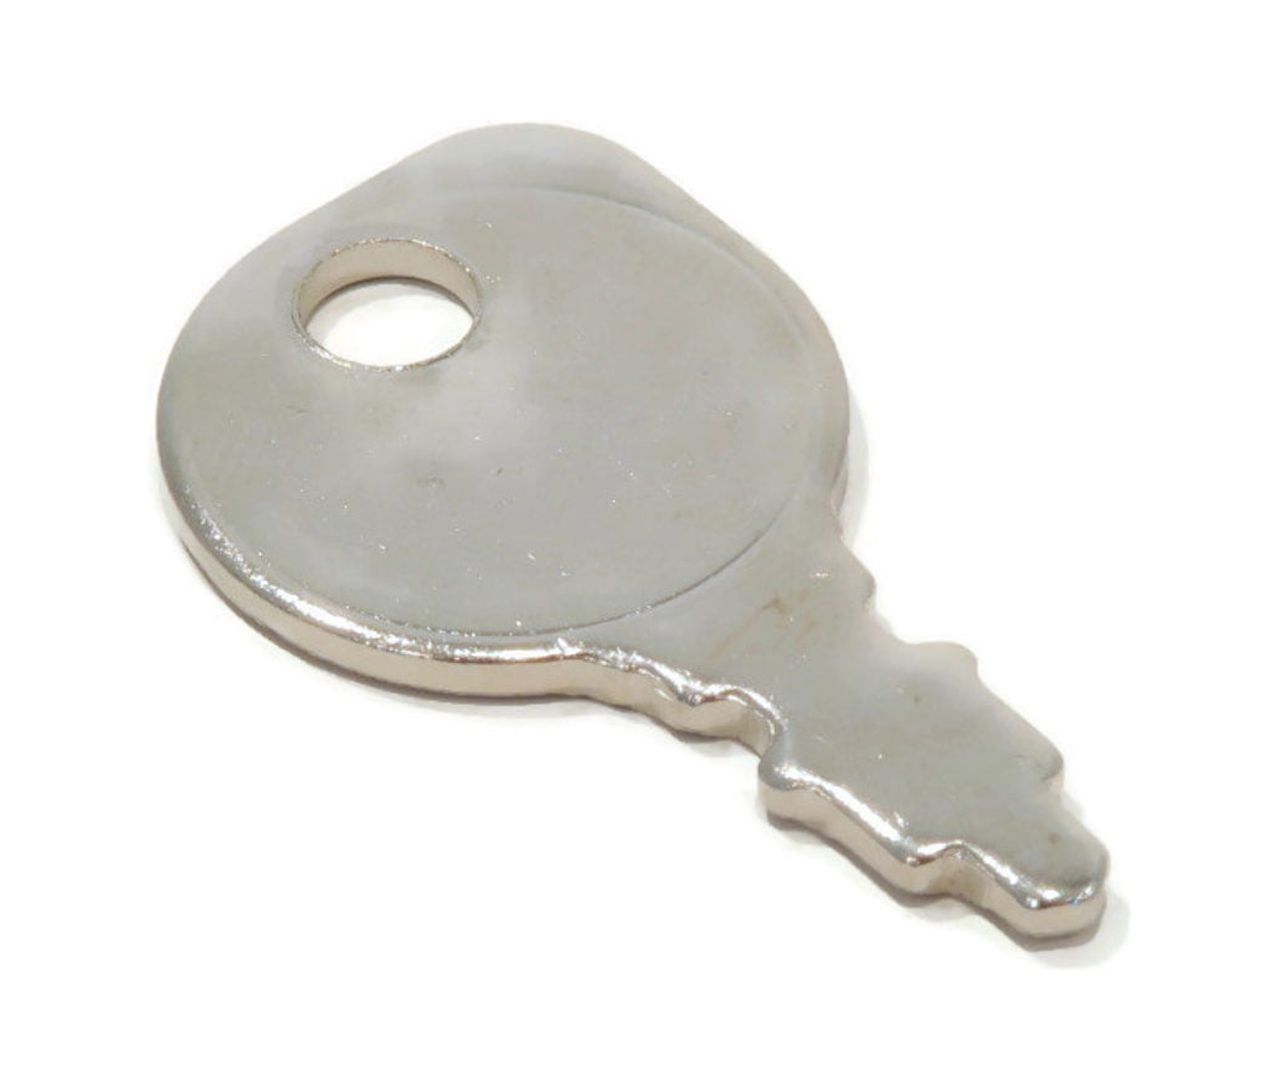 The ROP Shop | Starter Key For Briggs & Stratton 422707-1510-01, 422707-1511-01, 422707-1512-01 - image 4 of 5